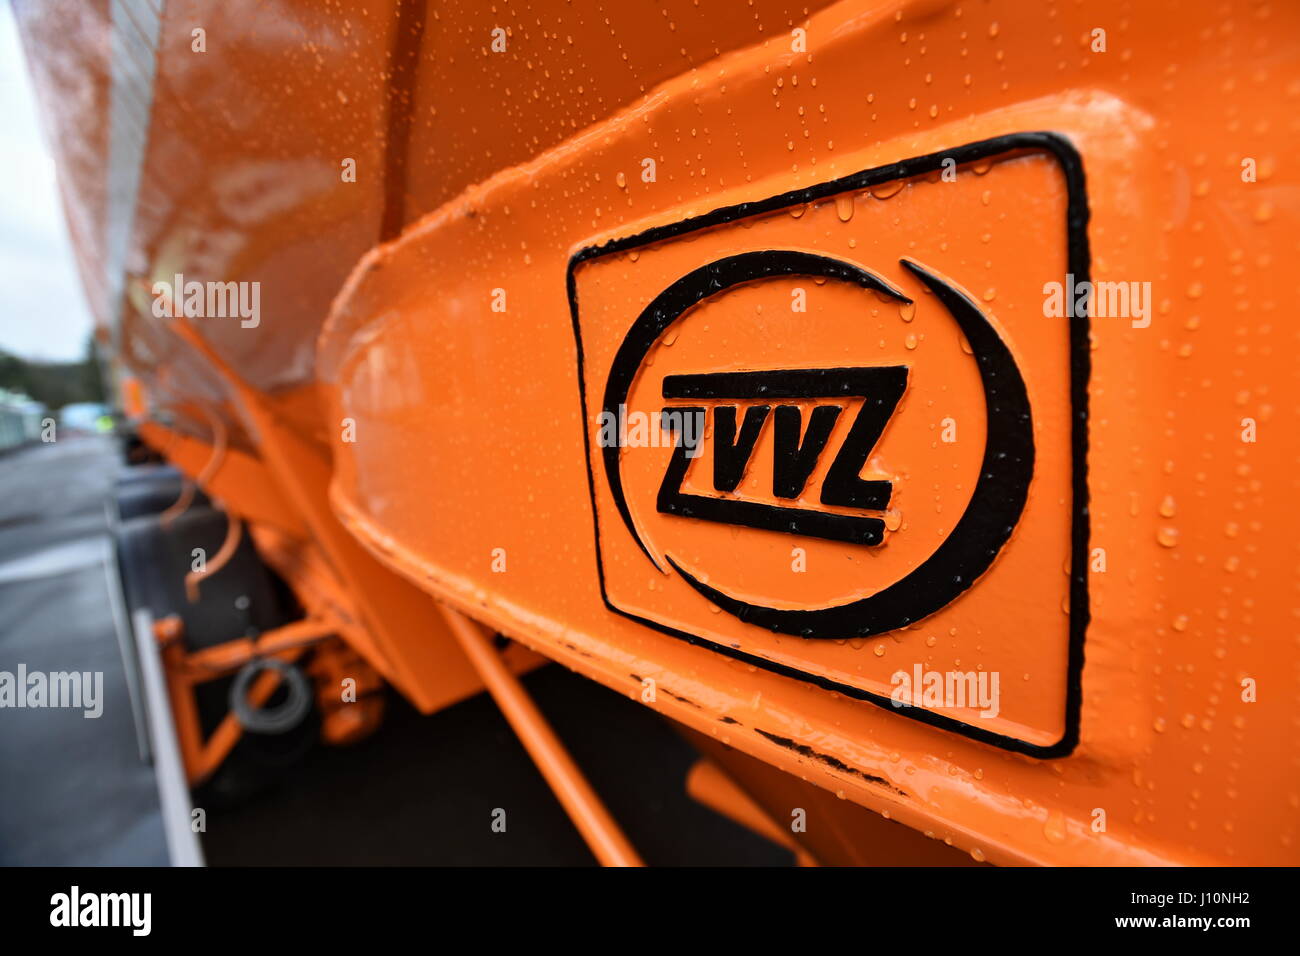 Engineering company ZVVZ returning to the European market with large-capacity containers whose production it has resumed and it expects to show a profit in this segment this year for the first time after four years, the company's Petr Koska has told CTK. The profit is expected to amount to millions of crowns. ZVVZ plans to sell over 50 large-capacity containers this year. Last year, ZVVZ Group's unit ZVVZ Machinery, which producers the containers, generated sales of Kc689m and made a profit of Kc14.9m. According to Koska, the success has been achieved mainly thanks to a return of Czech custome Stock Photo